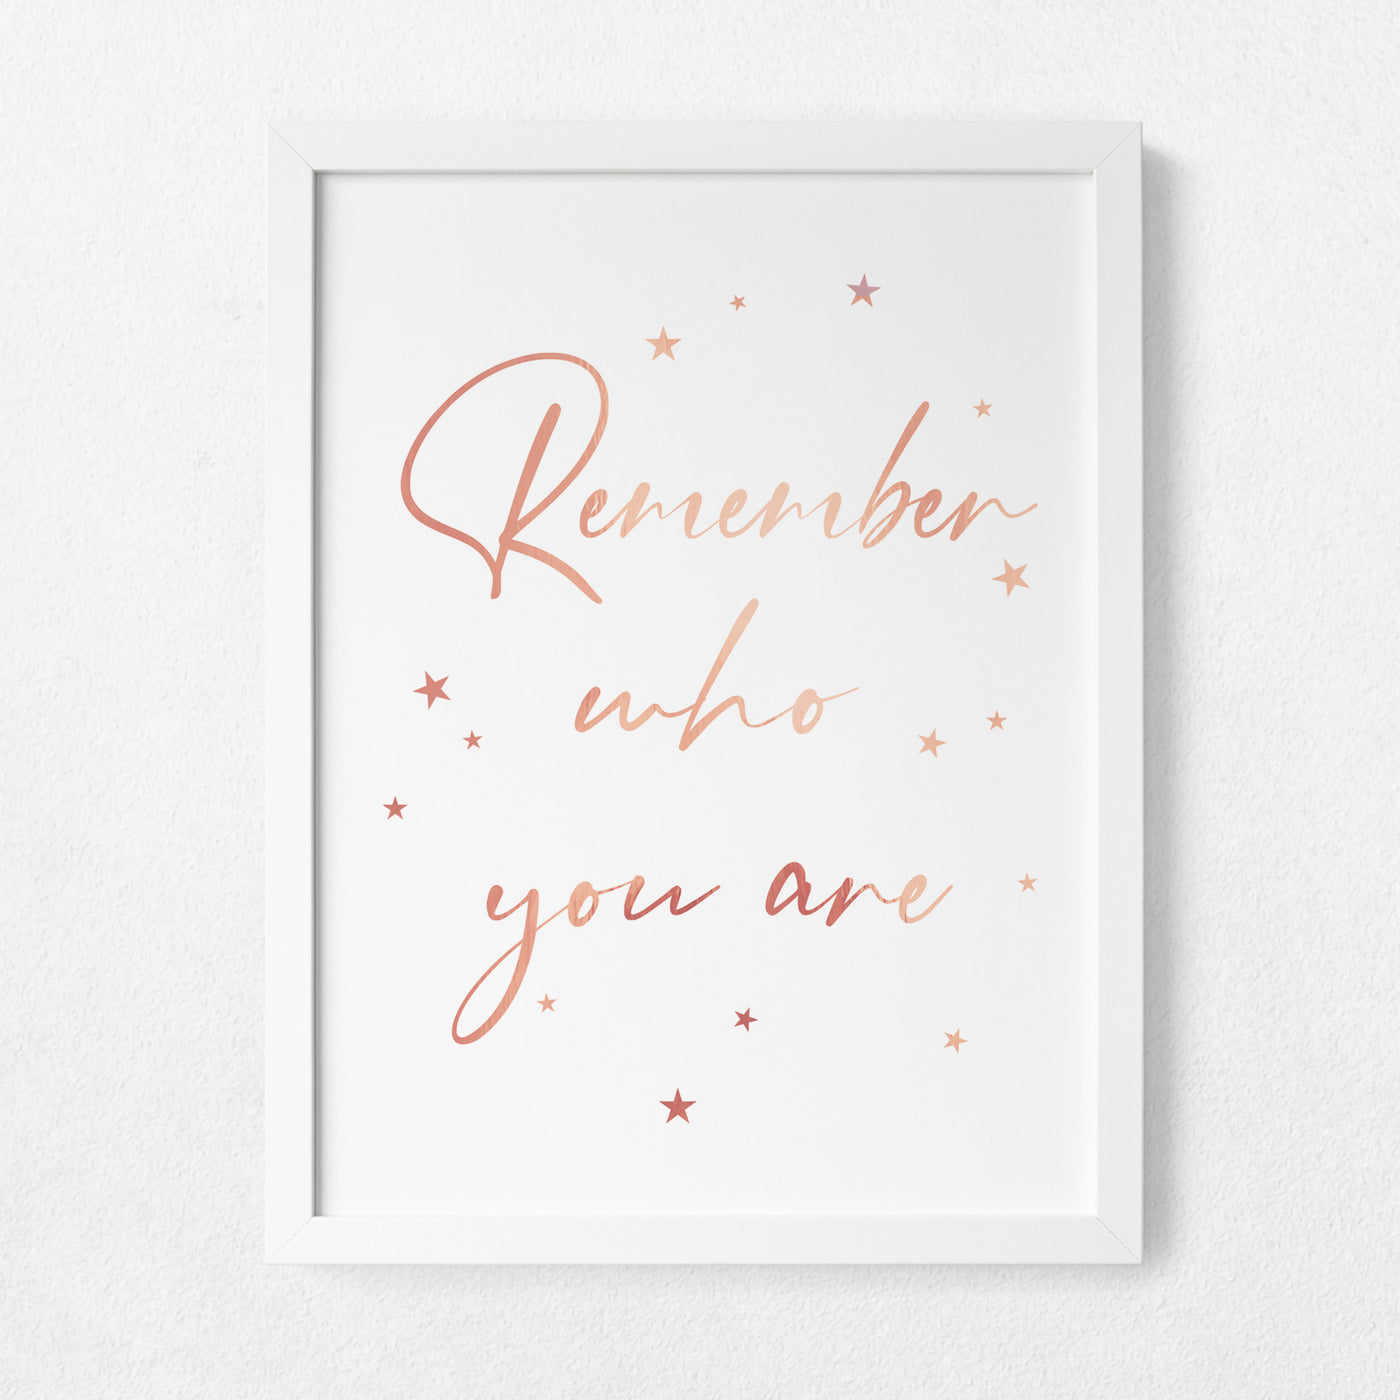 Remember who you are - foil print